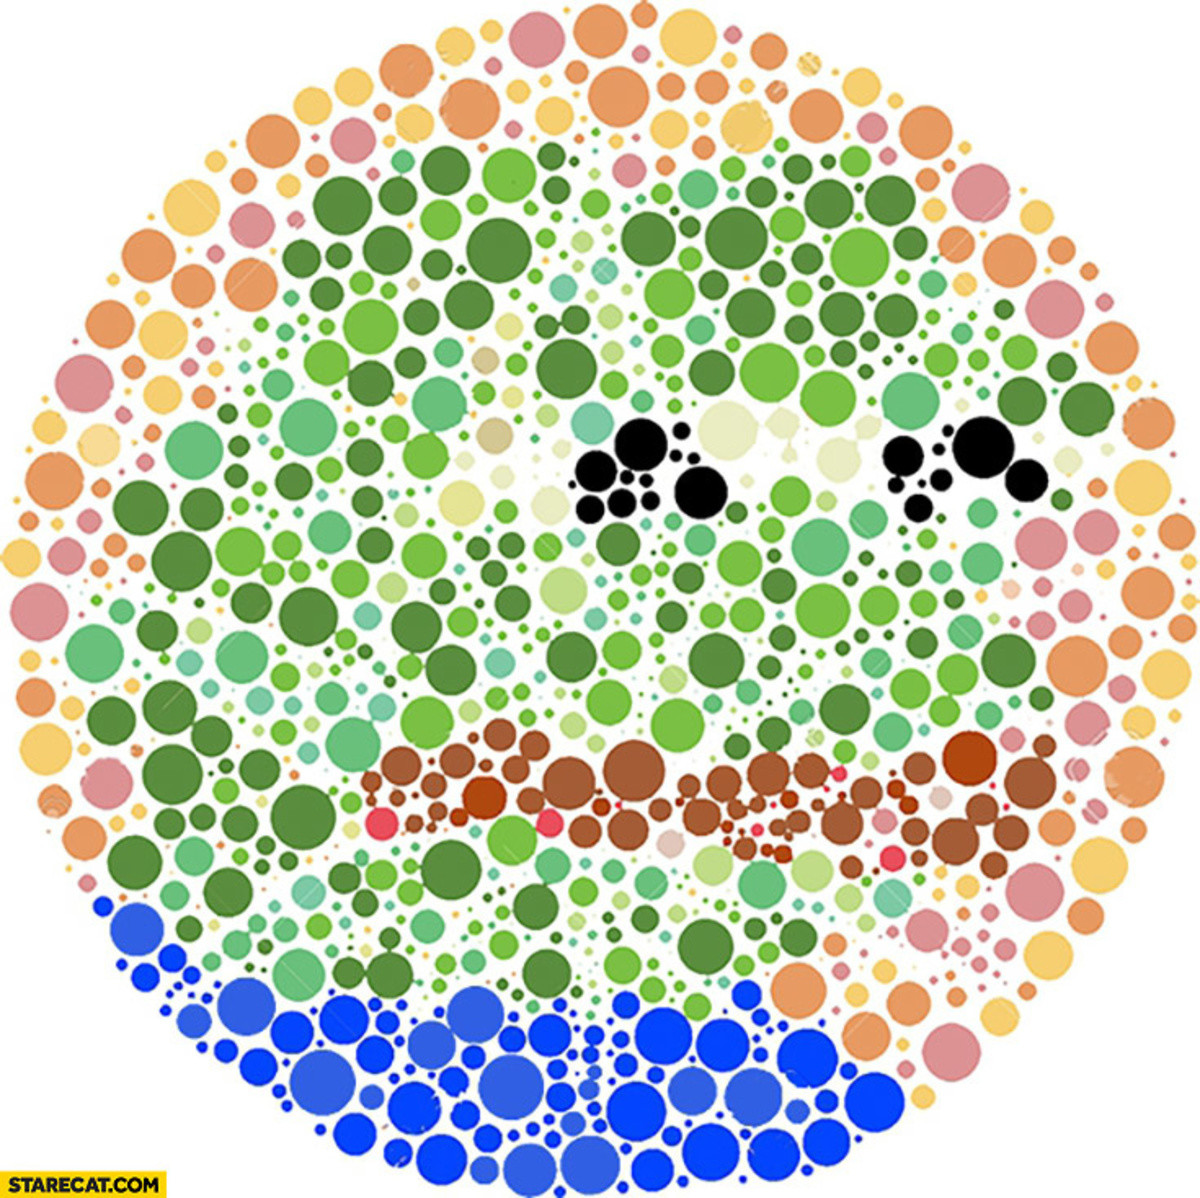 color blind-PEPE.